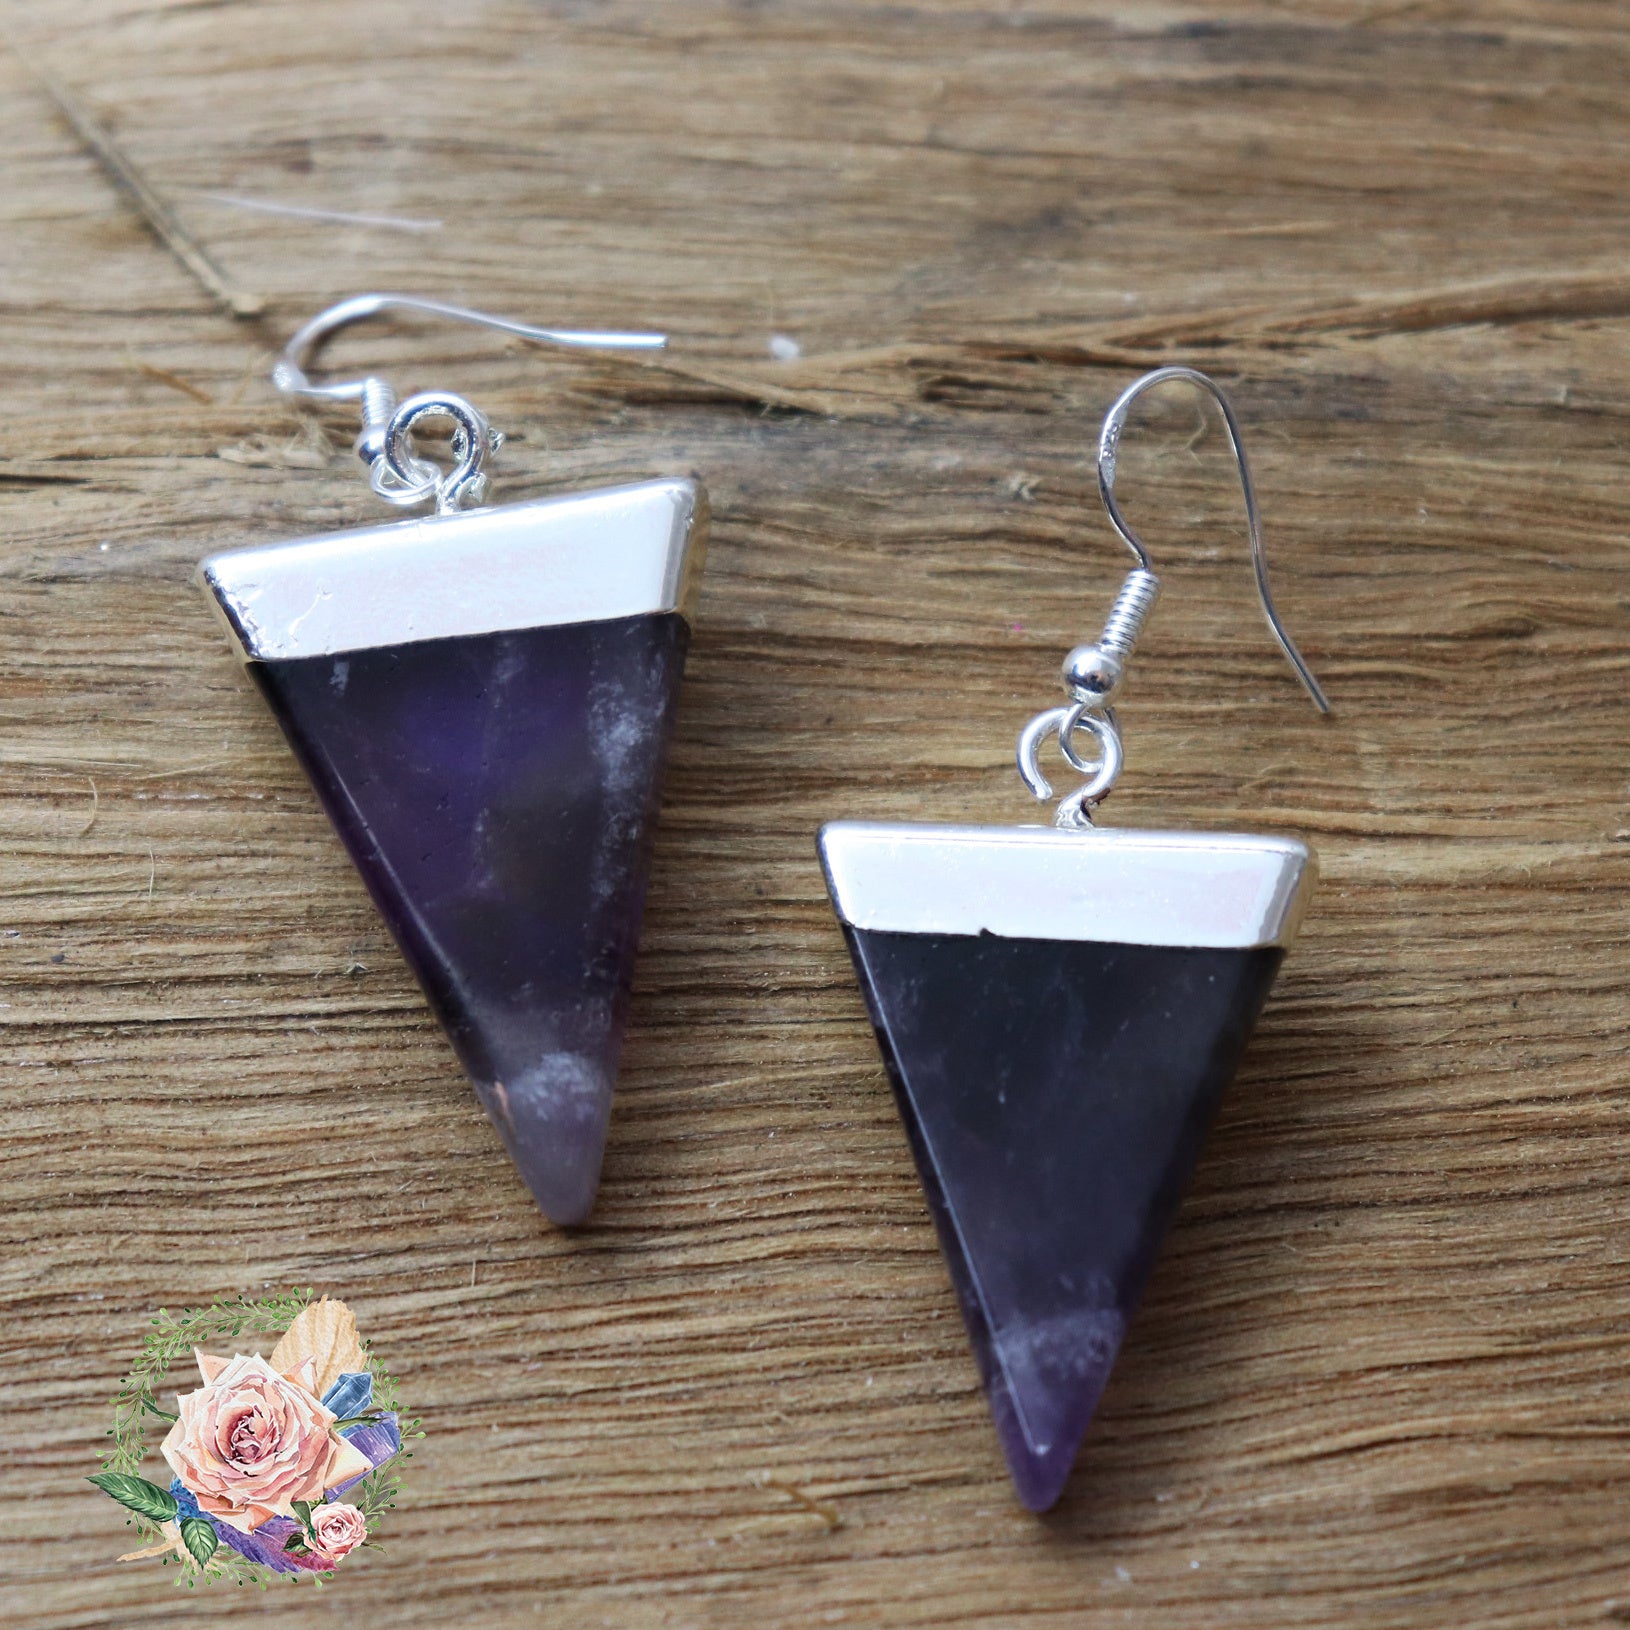 Handmade Silver and Amethyst earrings - The Spirit of Life